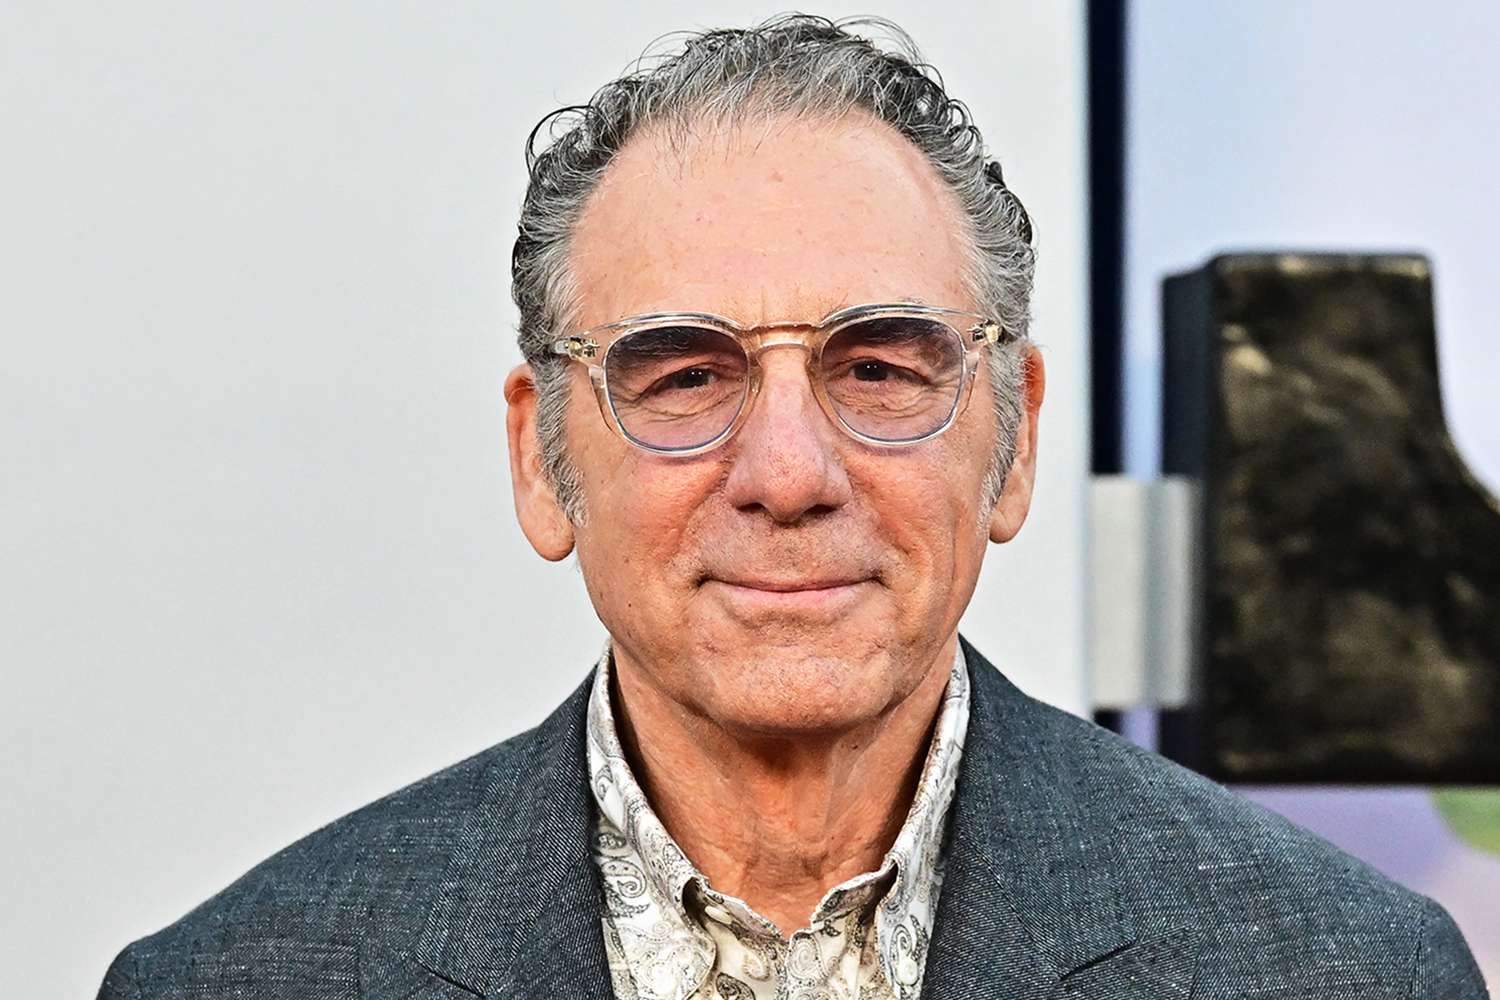 Seinfeld's Michael Richards Says 'Anger Had a Hold of Me' Ahead of 'Exodus' from Hollywood: 'I Canceled Myself Out'